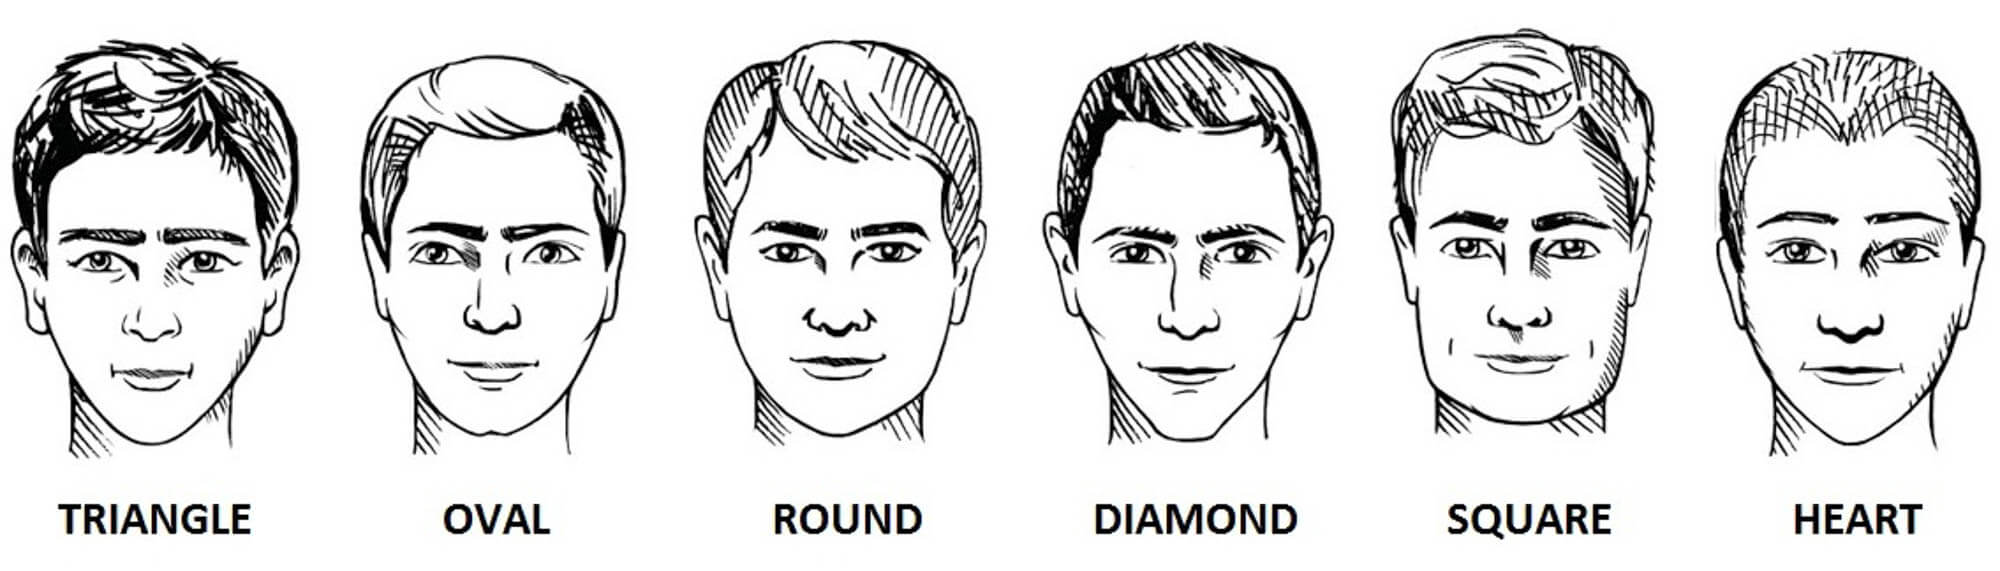 These Hairstyles Are Best Suited for Your Face Shape – Men - Zylu